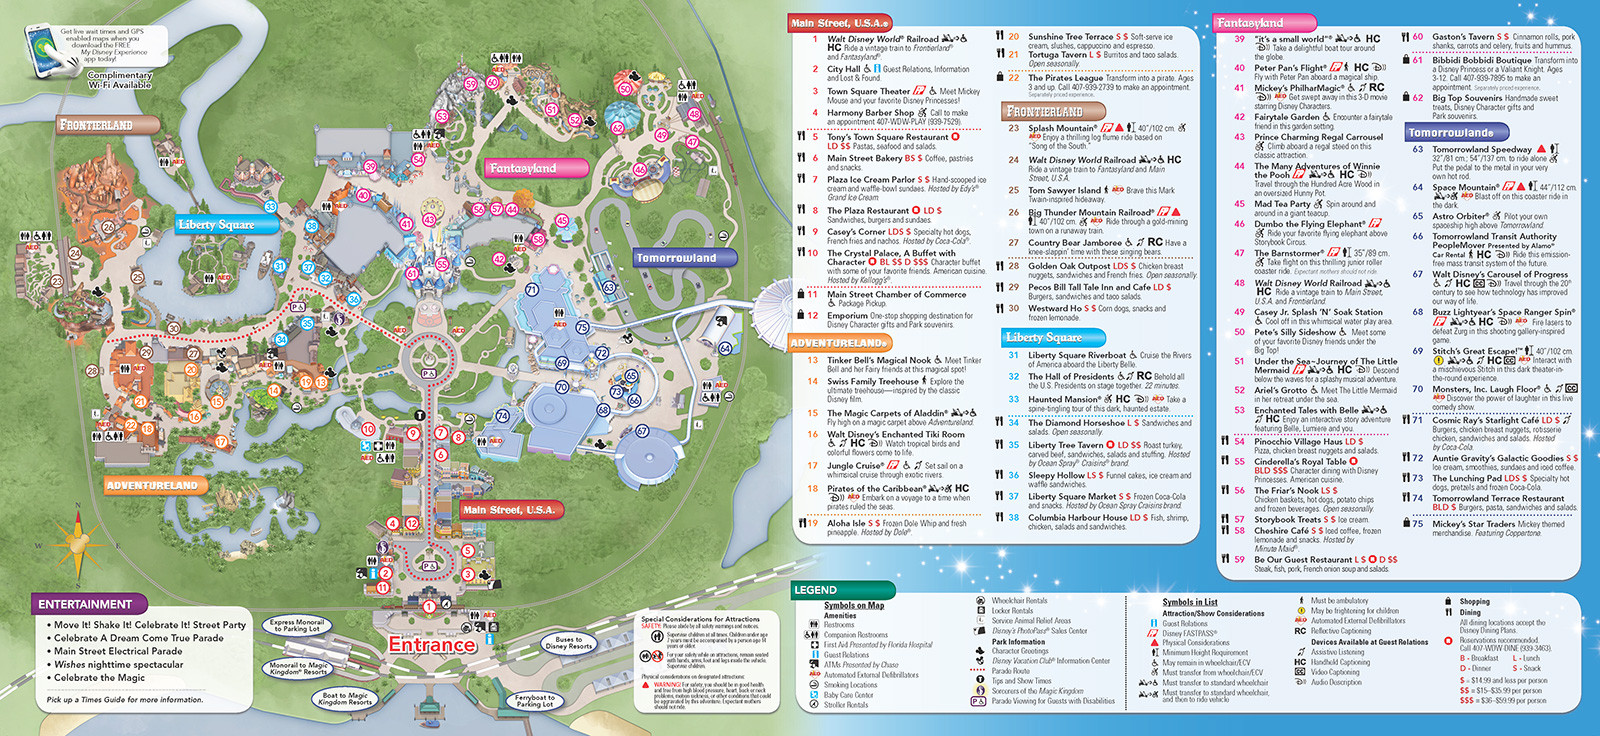 Printable Map Disney World Elegant New 2013 Park Maps And Times Guides 4 Of 20